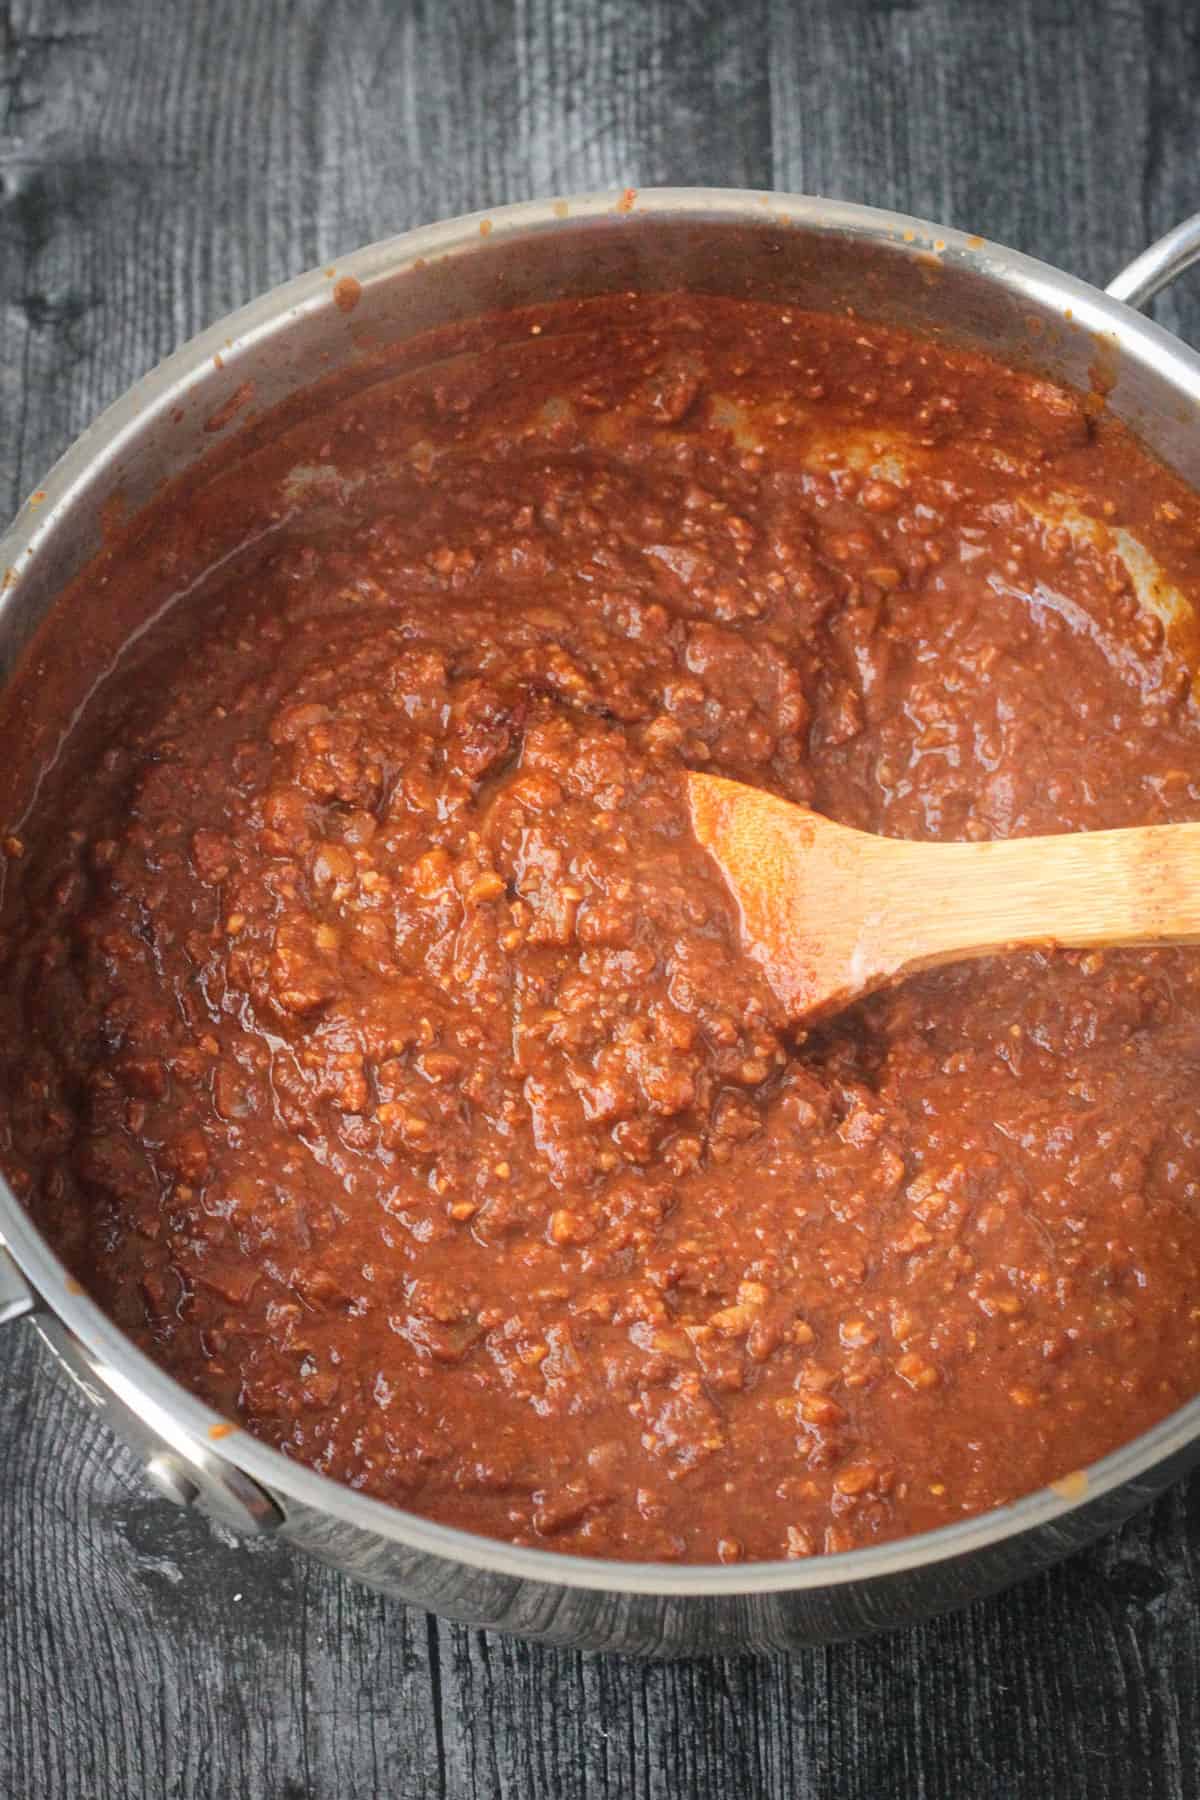 Wooden spoon stirring the finished thick sauce in a pot.